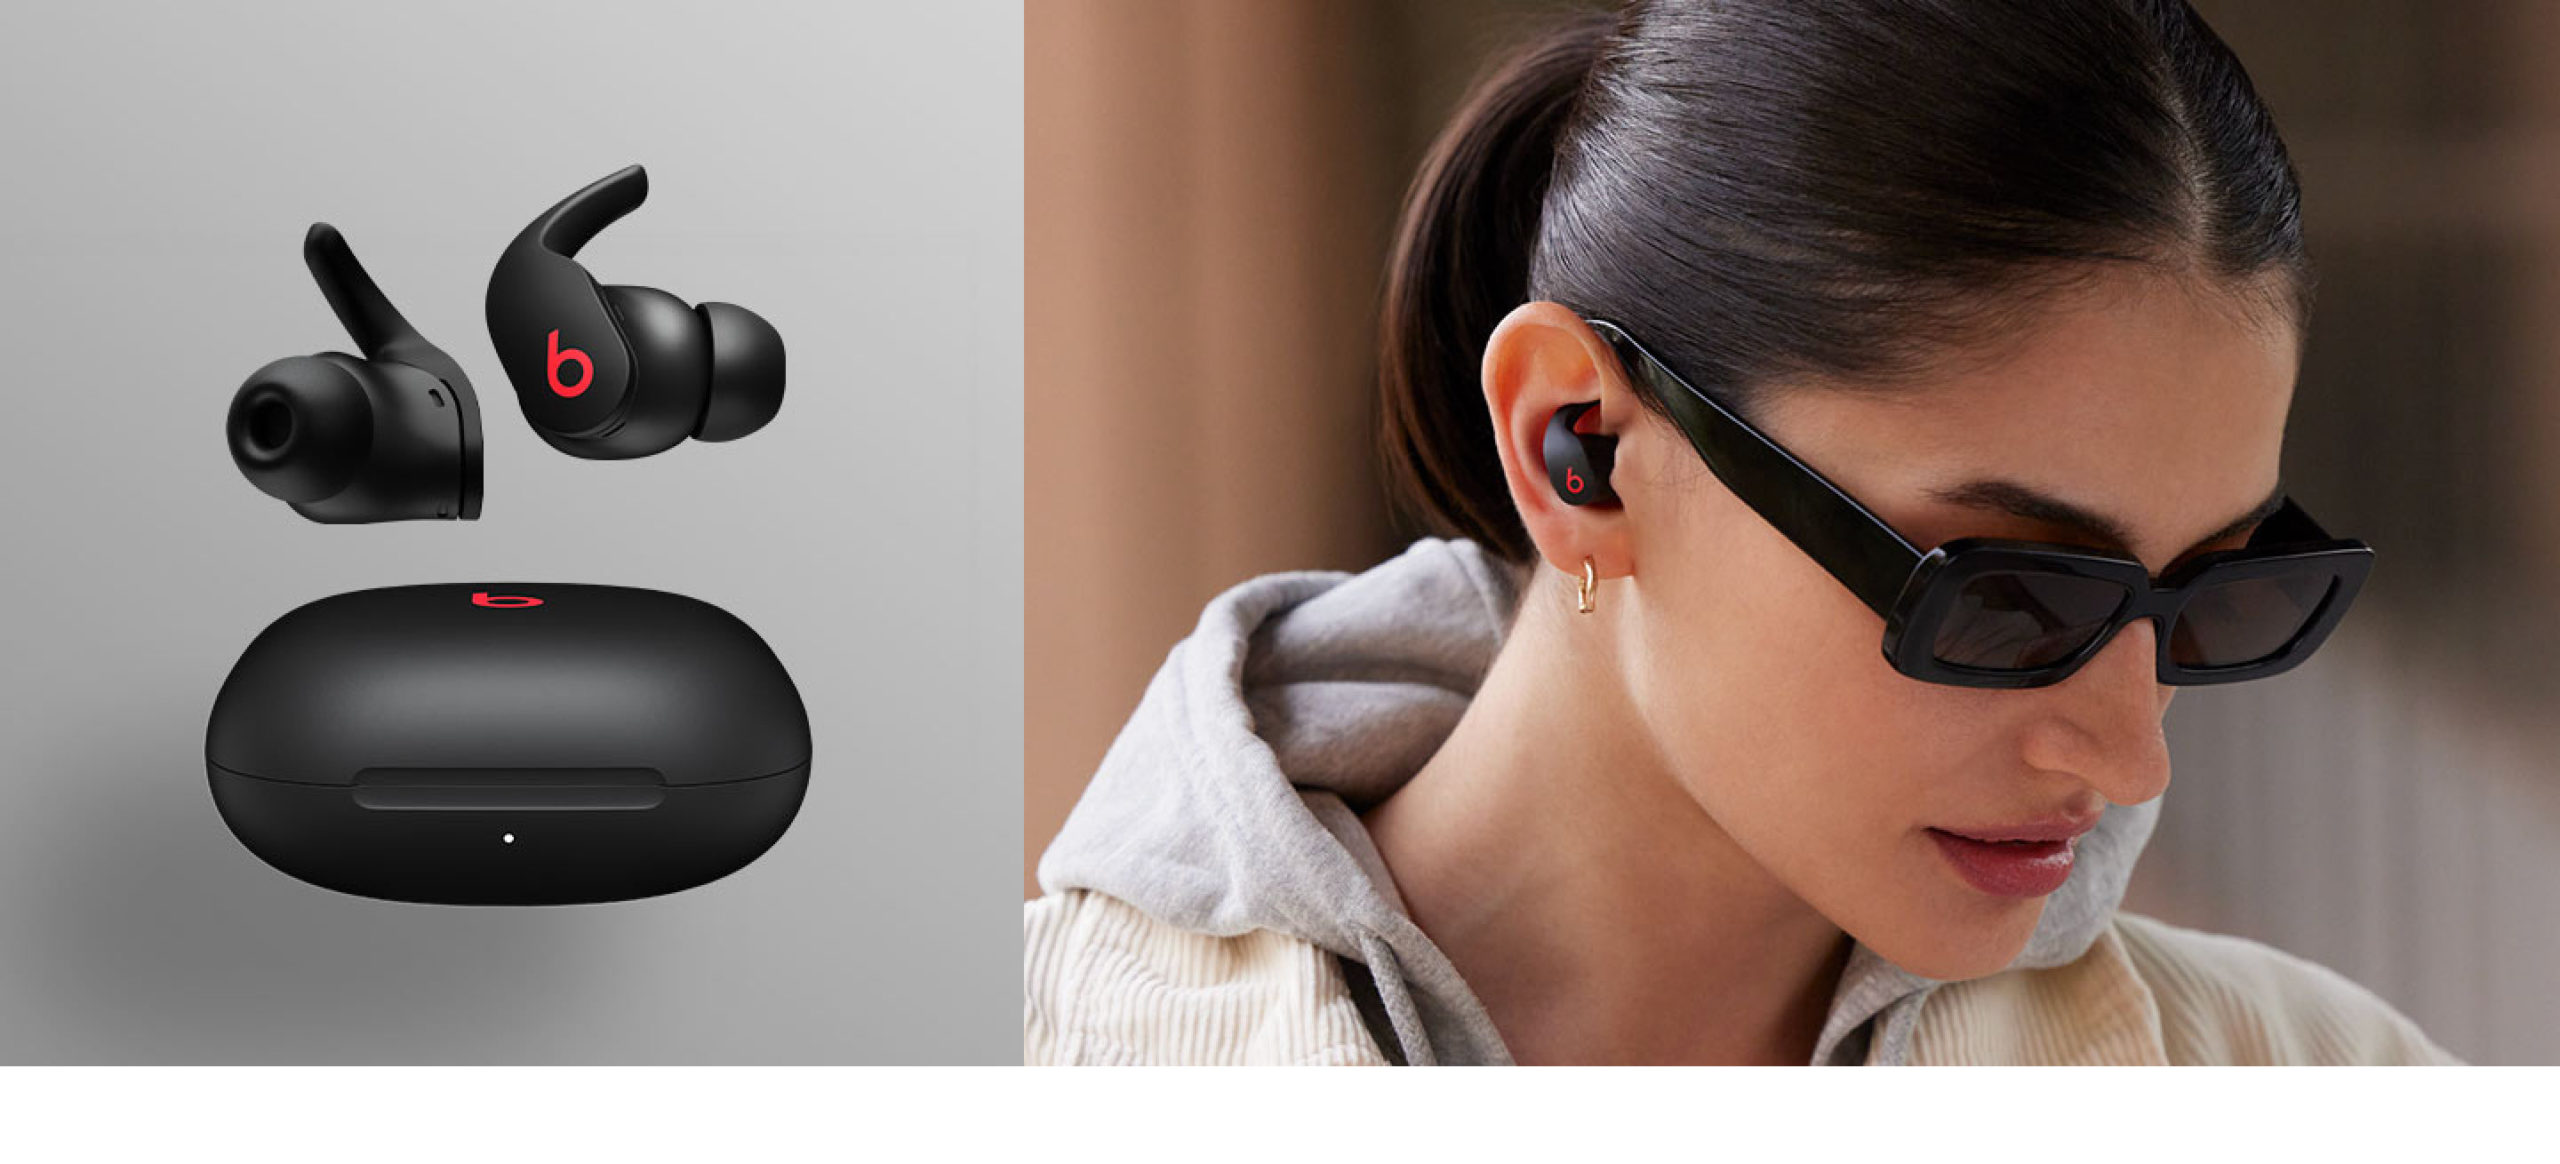 Best Wireless Earbuds to buy for your workout - 2022 Edition